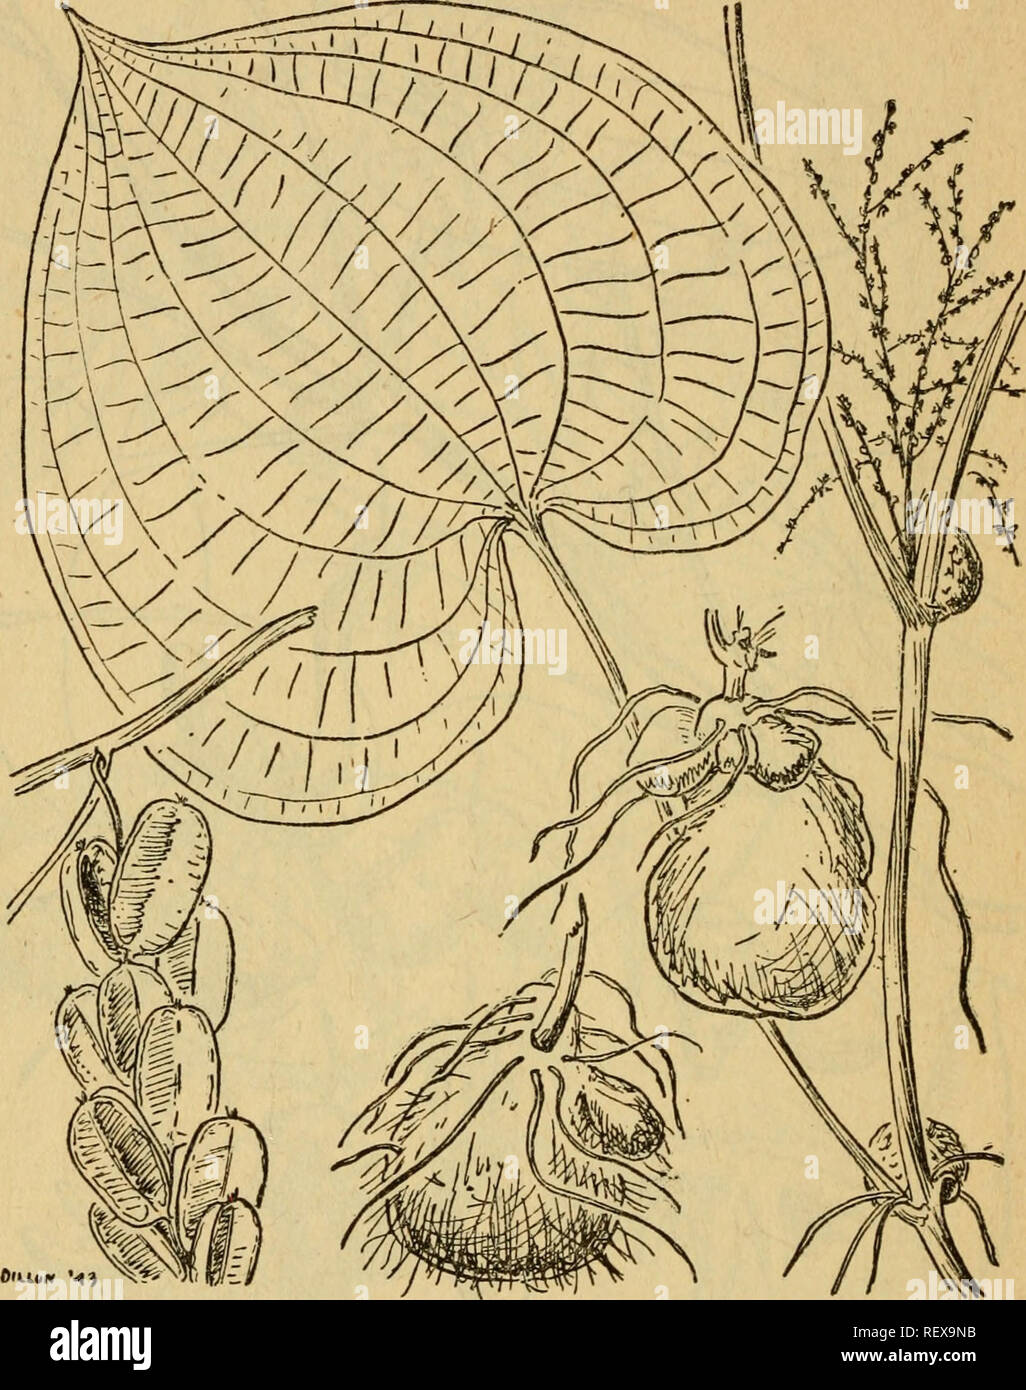 . Emergency food plants and poisonous plants of the islands of the Pacific. Plants, Edible -- Islands of the Pacific; Poisonous plants. 19 QUARTERMASTER CORPS. Figure 22.—Bulb yam {Dioscorea bulbifera). enormously in shape and size, sometimes rather small, some- times weighing up to 30 pounds. The flesh varies from white to purple. An excellent food boiled or roasted. Local names: Ubi, uhi, ufi, ui-pdrai, uvi, uwi, huwi, heri, heli, lame, lutu, gusu, dago. d. Bulb yam {Dioscorea bulbifera).—^This twining vine has smooth stems. It grows in thickets, and is sometimes cul- tivated. Usually fairly Stock Photo